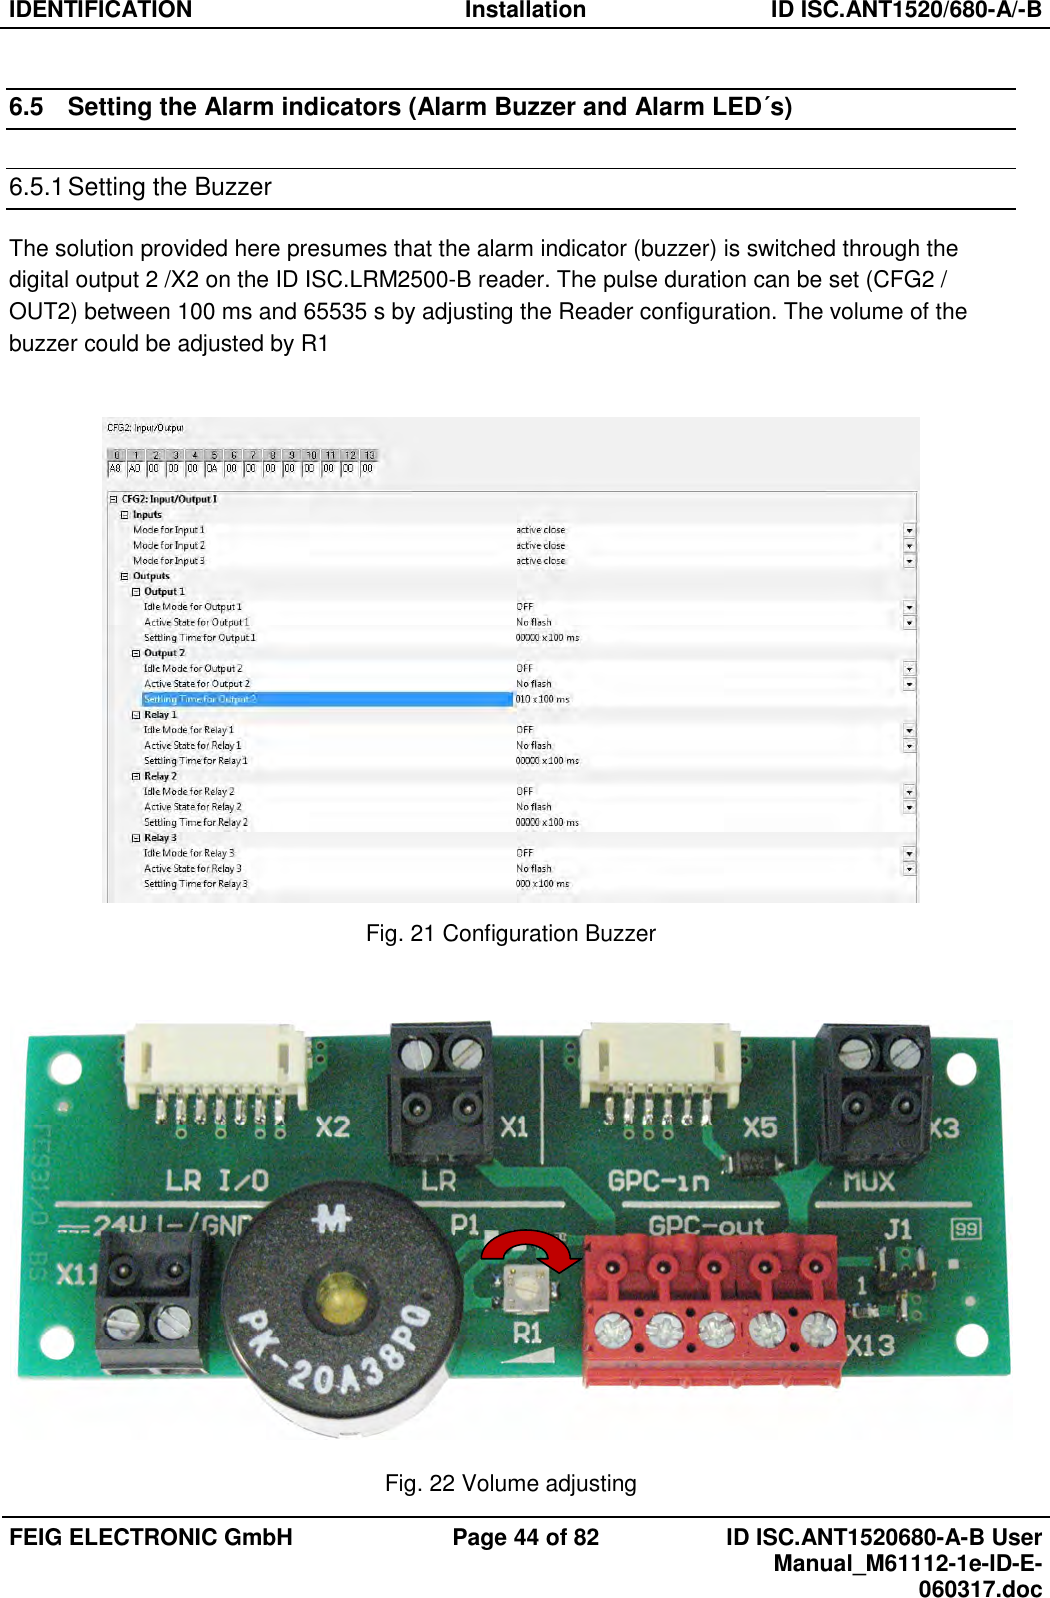 IDENTIFICATION  Installation  ID ISC.ANT1520/680-A/-B  FEIG ELECTRONIC GmbH  Page 44 of 82  ID ISC.ANT1520680-A-B User Manual_M61112-1e-ID-E-060317.doc  6.5  Setting the Alarm indicators (Alarm Buzzer and Alarm LED´s) 6.5.1 Setting the Buzzer The solution provided here presumes that the alarm indicator (buzzer) is switched through the digital output 2 /X2 on the ID ISC.LRM2500-B reader. The pulse duration can be set (CFG2 / OUT2) between 100 ms and 65535 s by adjusting the Reader configuration. The volume of the buzzer could be adjusted by R1   Fig. 21 Configuration Buzzer   Fig. 22 Volume adjusting 